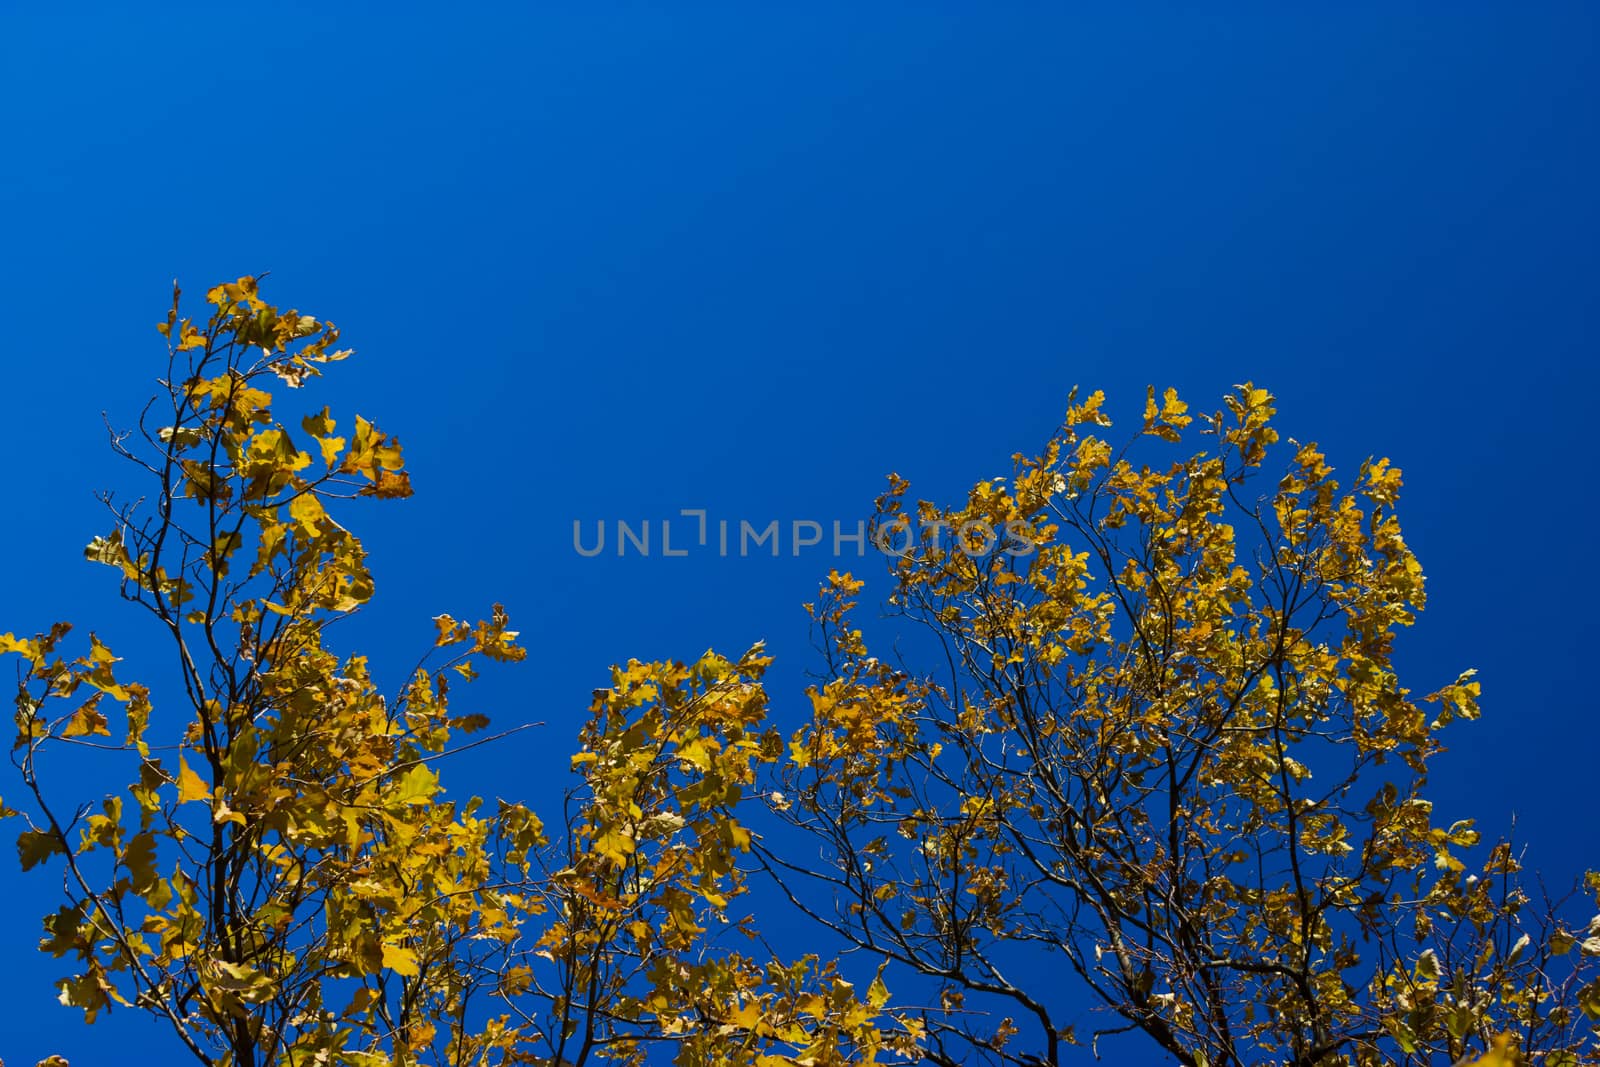 vivid, vibrant blue sky and golden autumn leaves